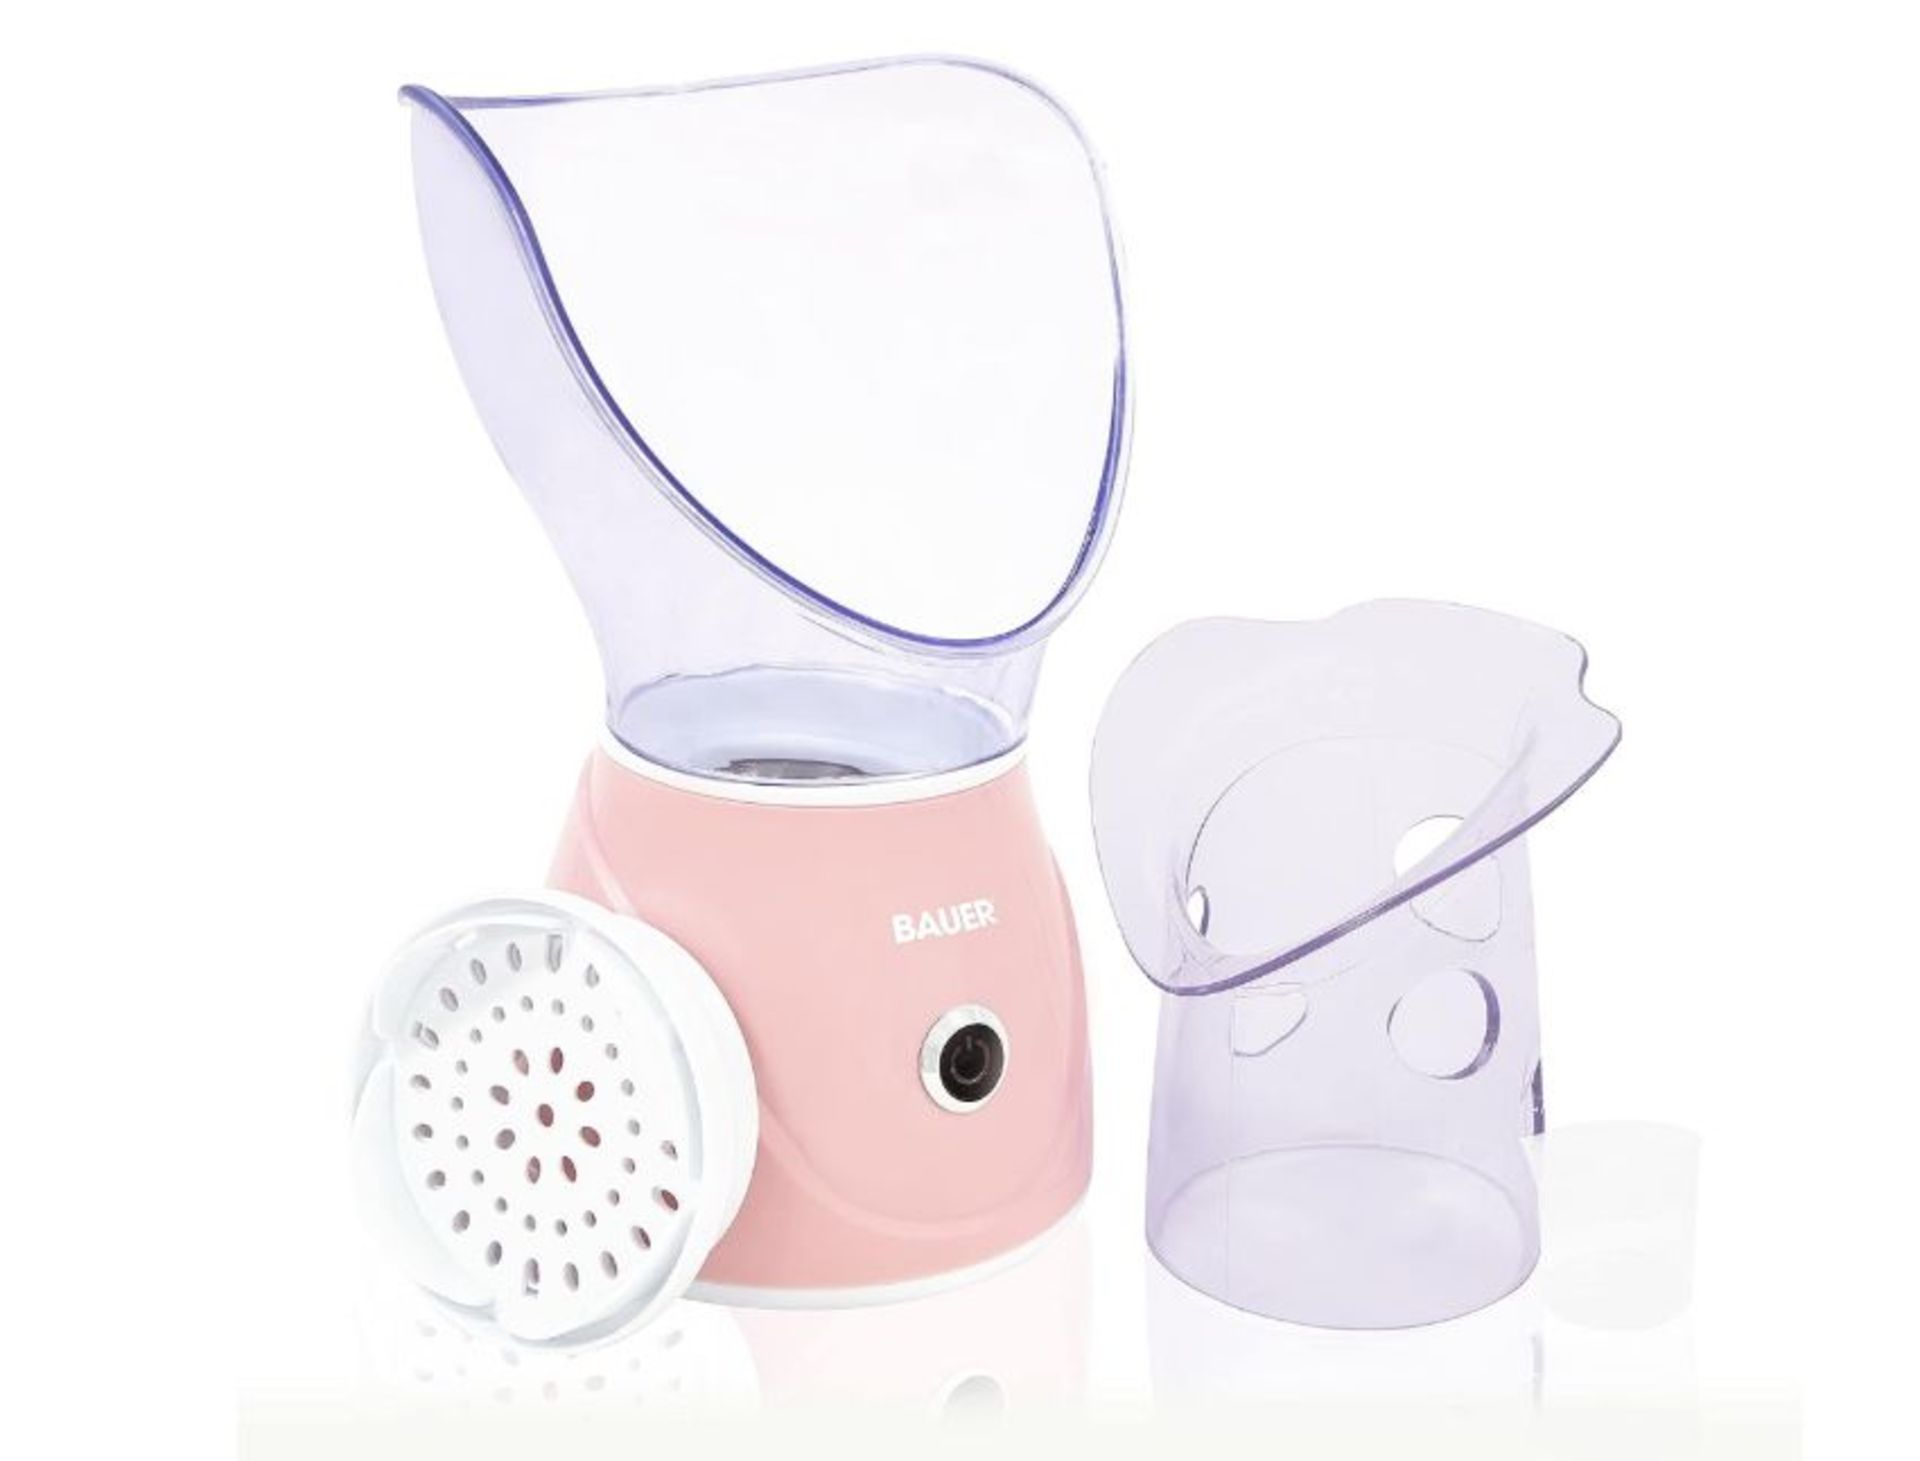 Aqua Care Facial Steamer and Nasal Inhaler/Steam Cleansing Sauna For Softer Skin/Quick Heat Up